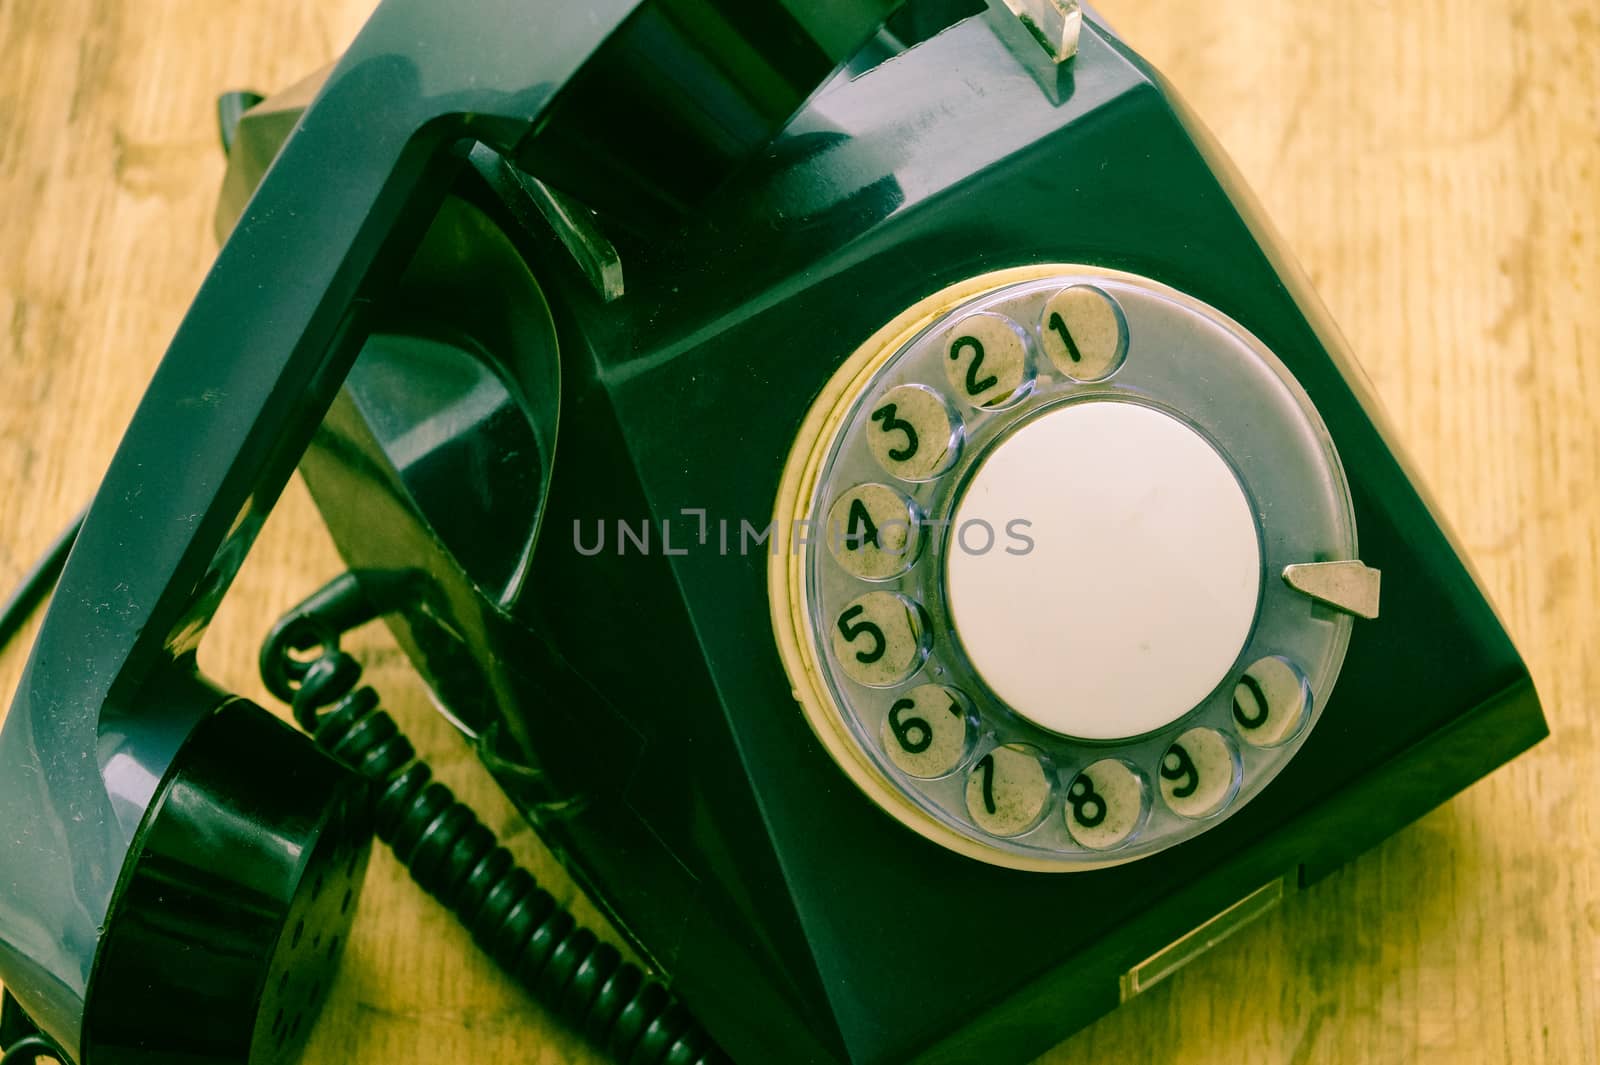 the old disk phone a means of communication of the past